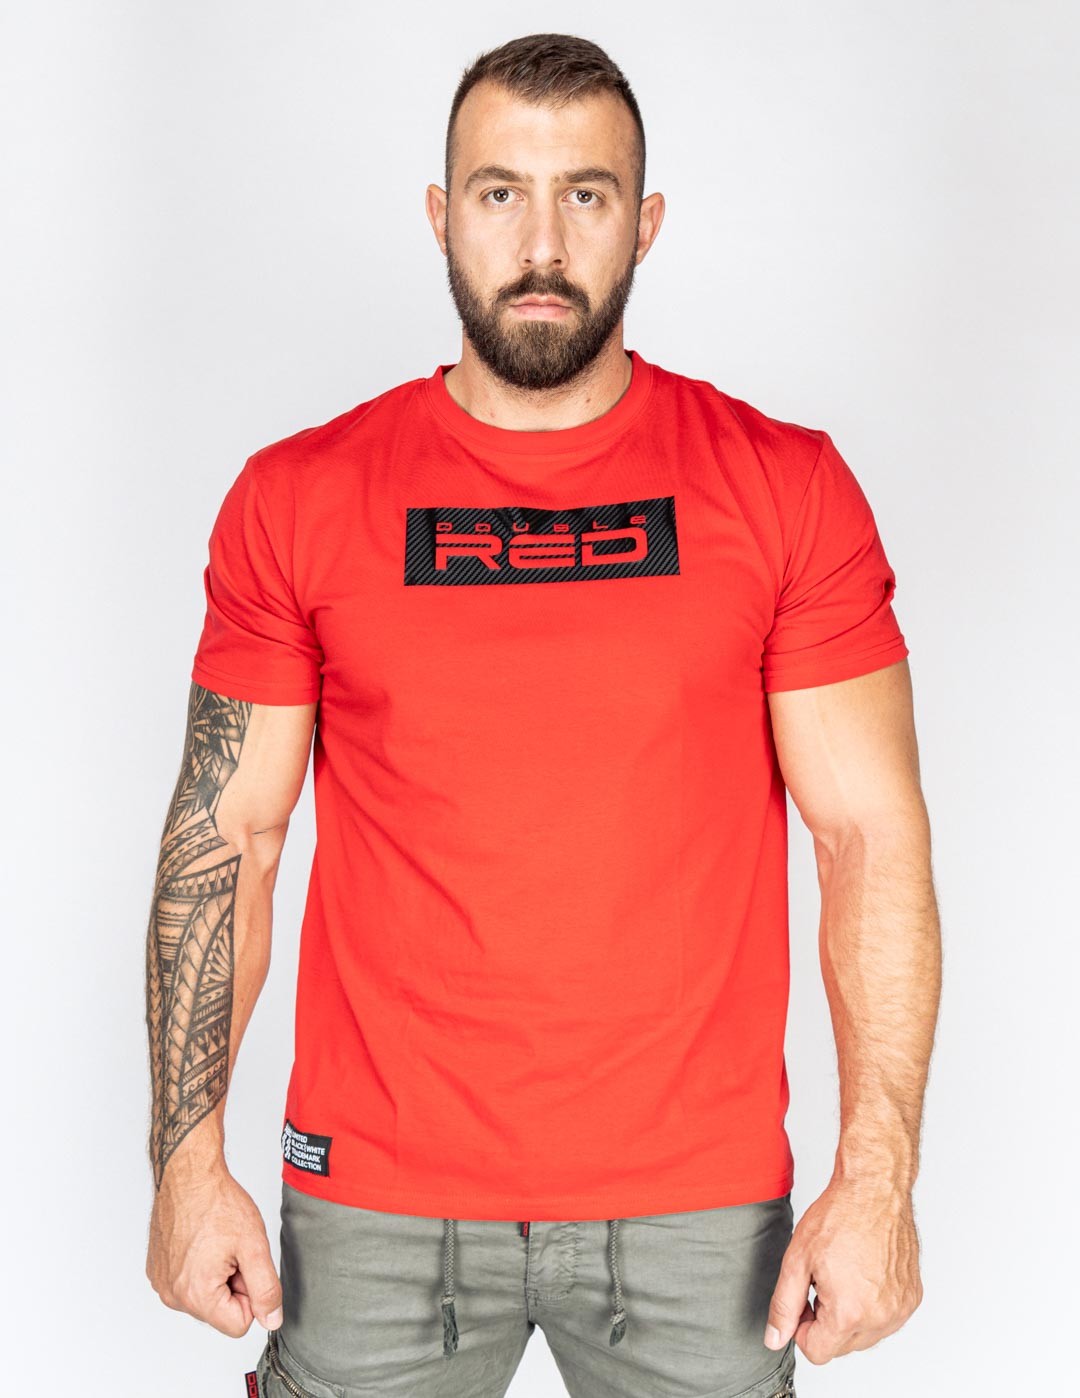 T-shirt CARBON Edition Red